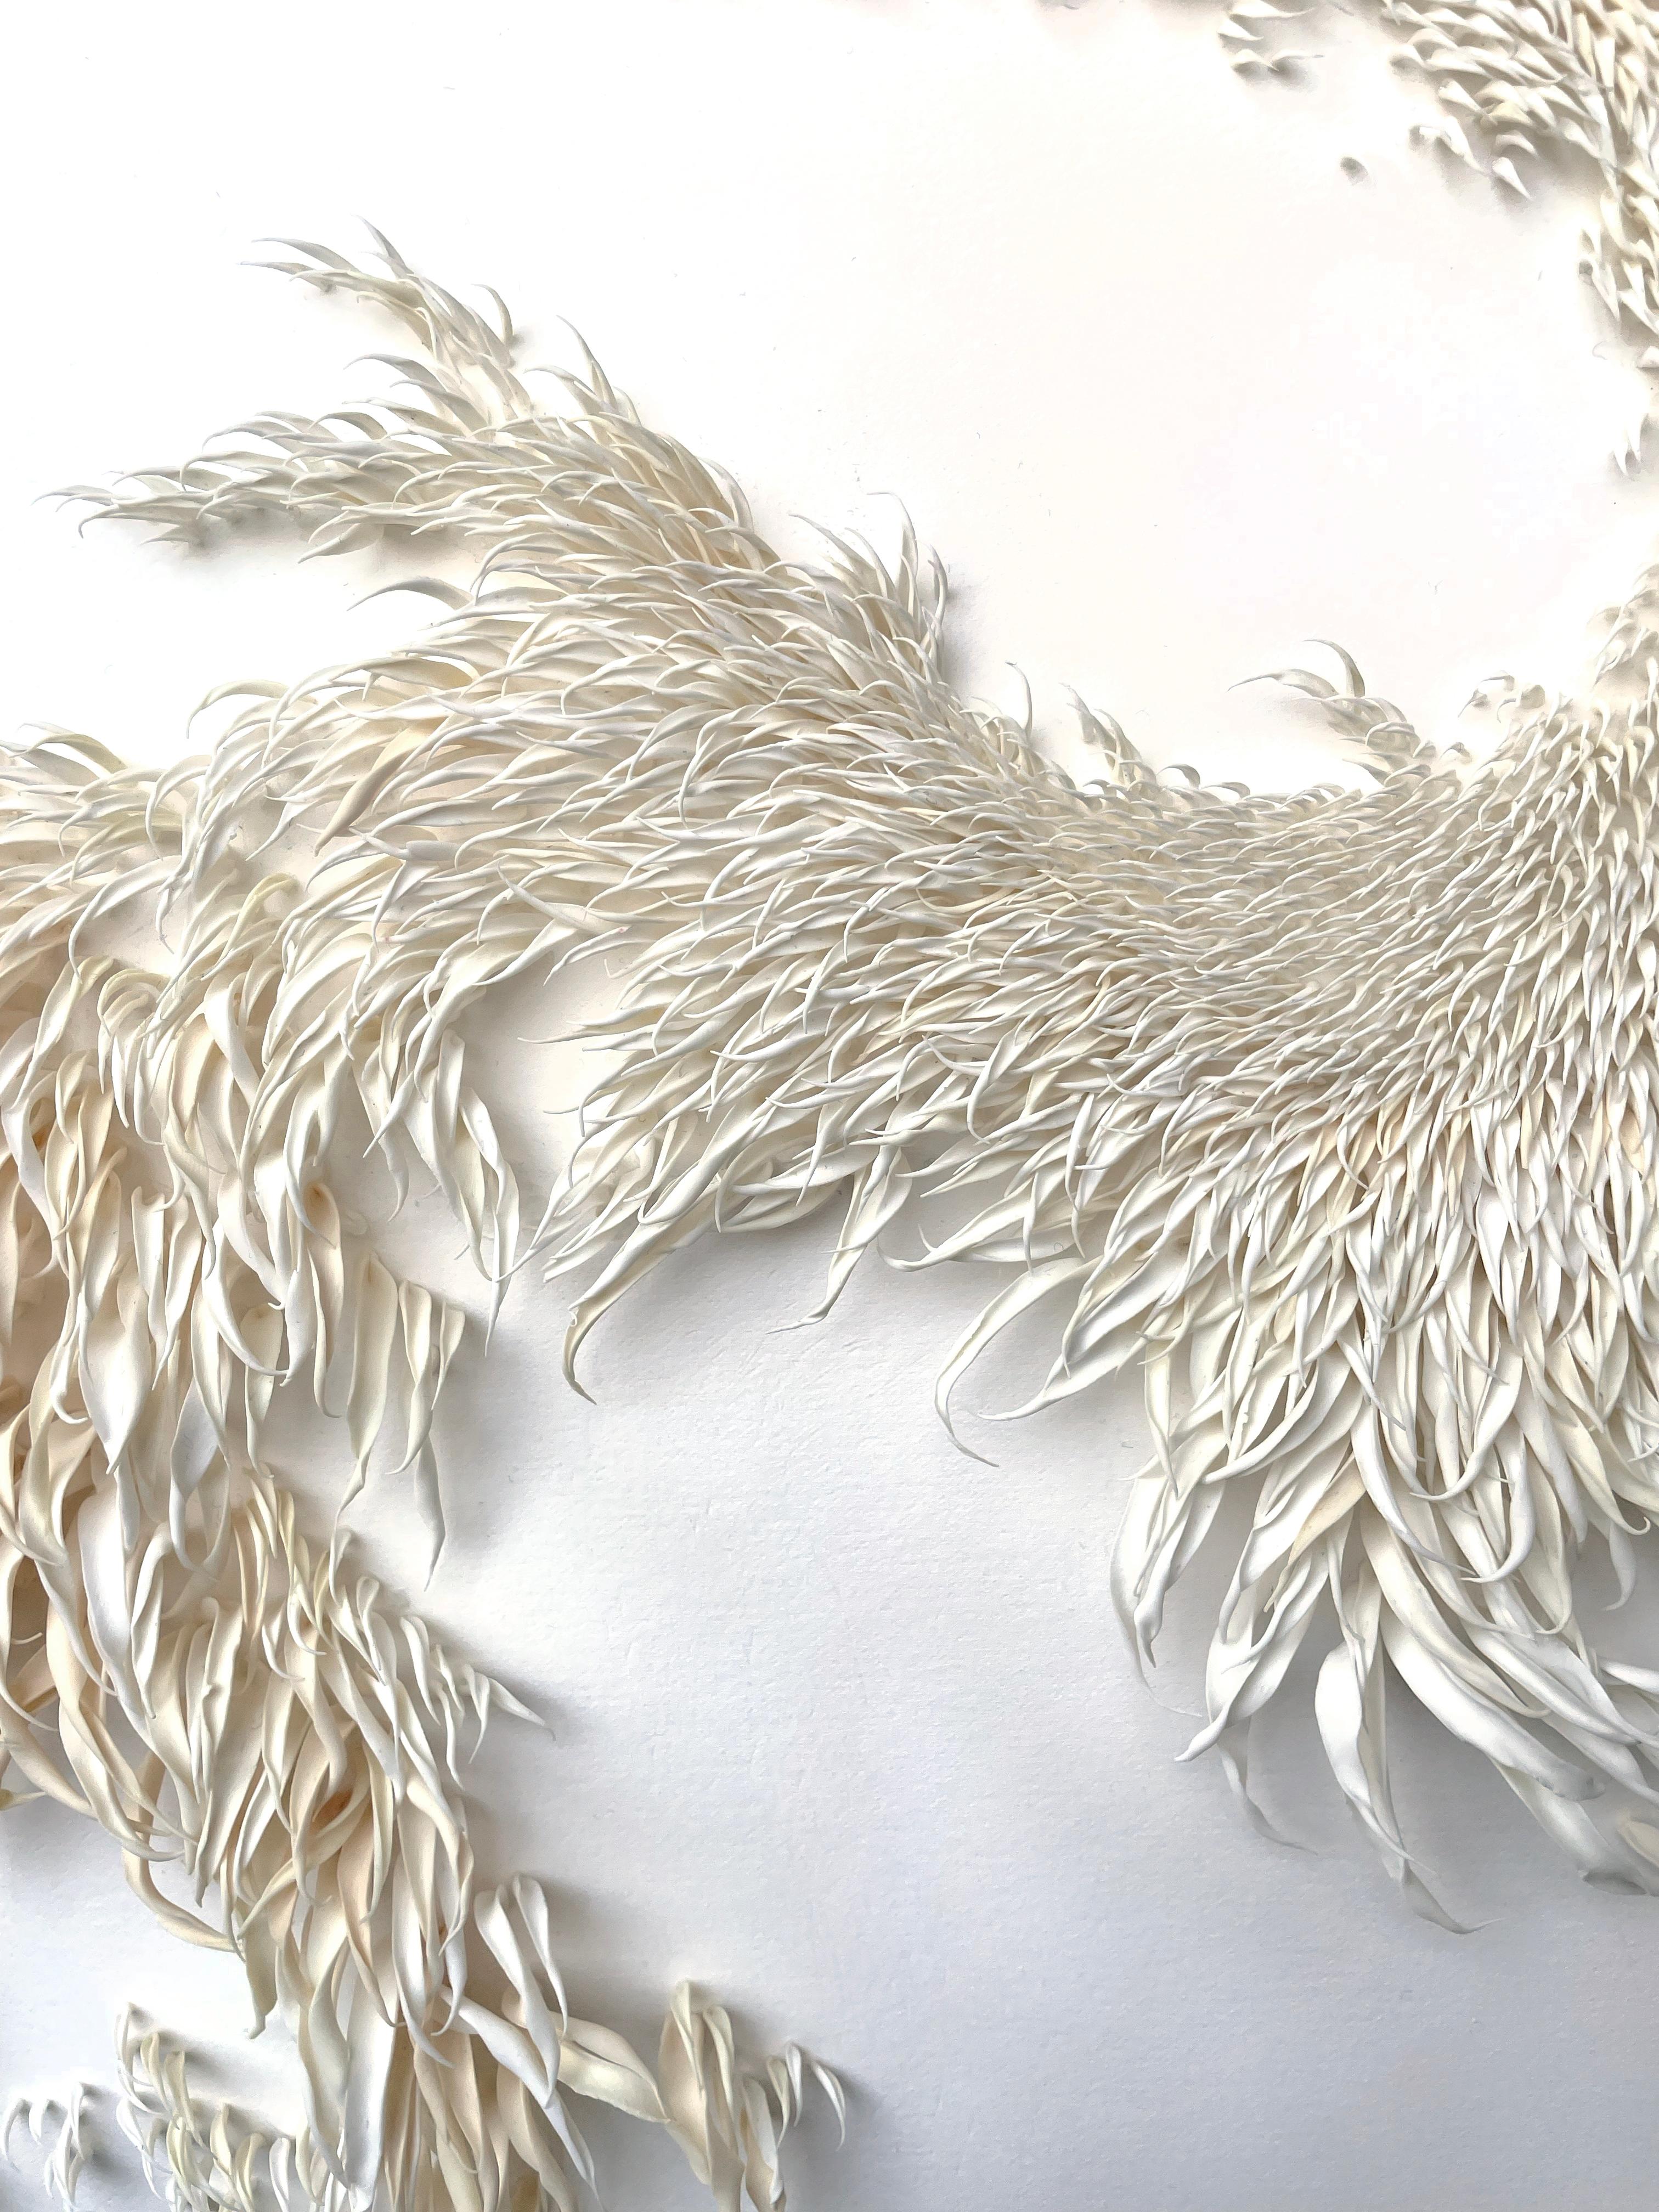 The new works of Mylinh Nguyen designed from polymer resin, bring us into a nature whose refinement commands admiration. From the physiognomy of living or extinct plant species, the artist produces fascinating works where her mastery of techniques